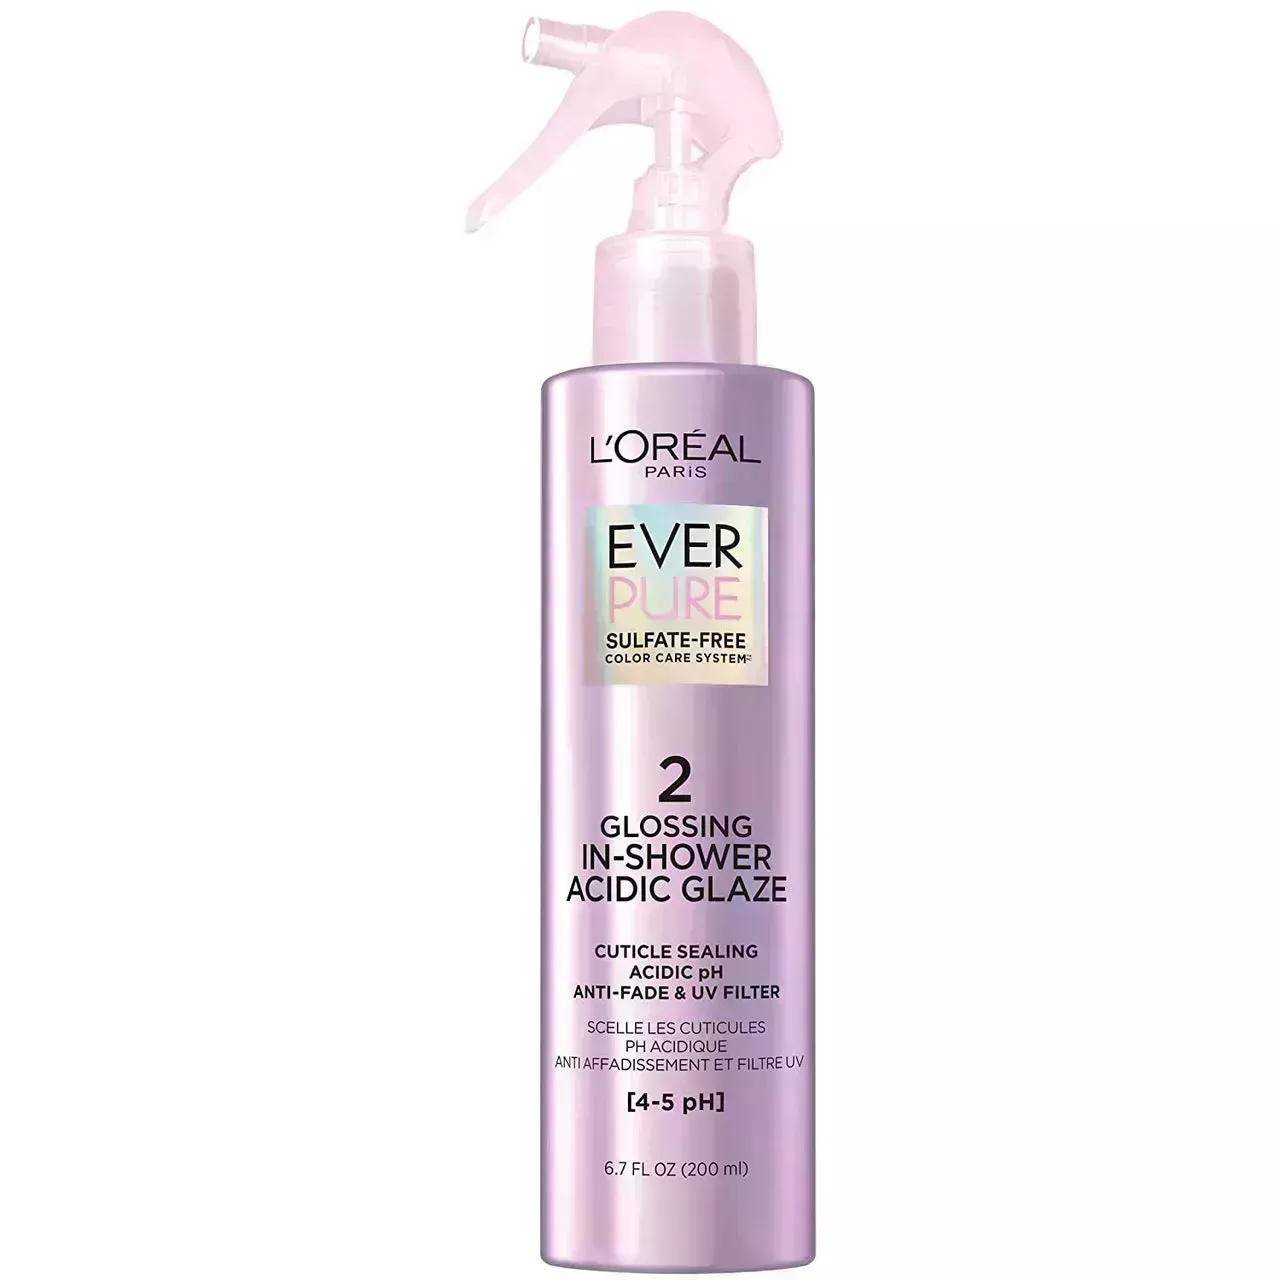 metallic pink spray bottle of L'Oréal Paris's EverPure Glossing In Shower Acidic Glaze on a white background